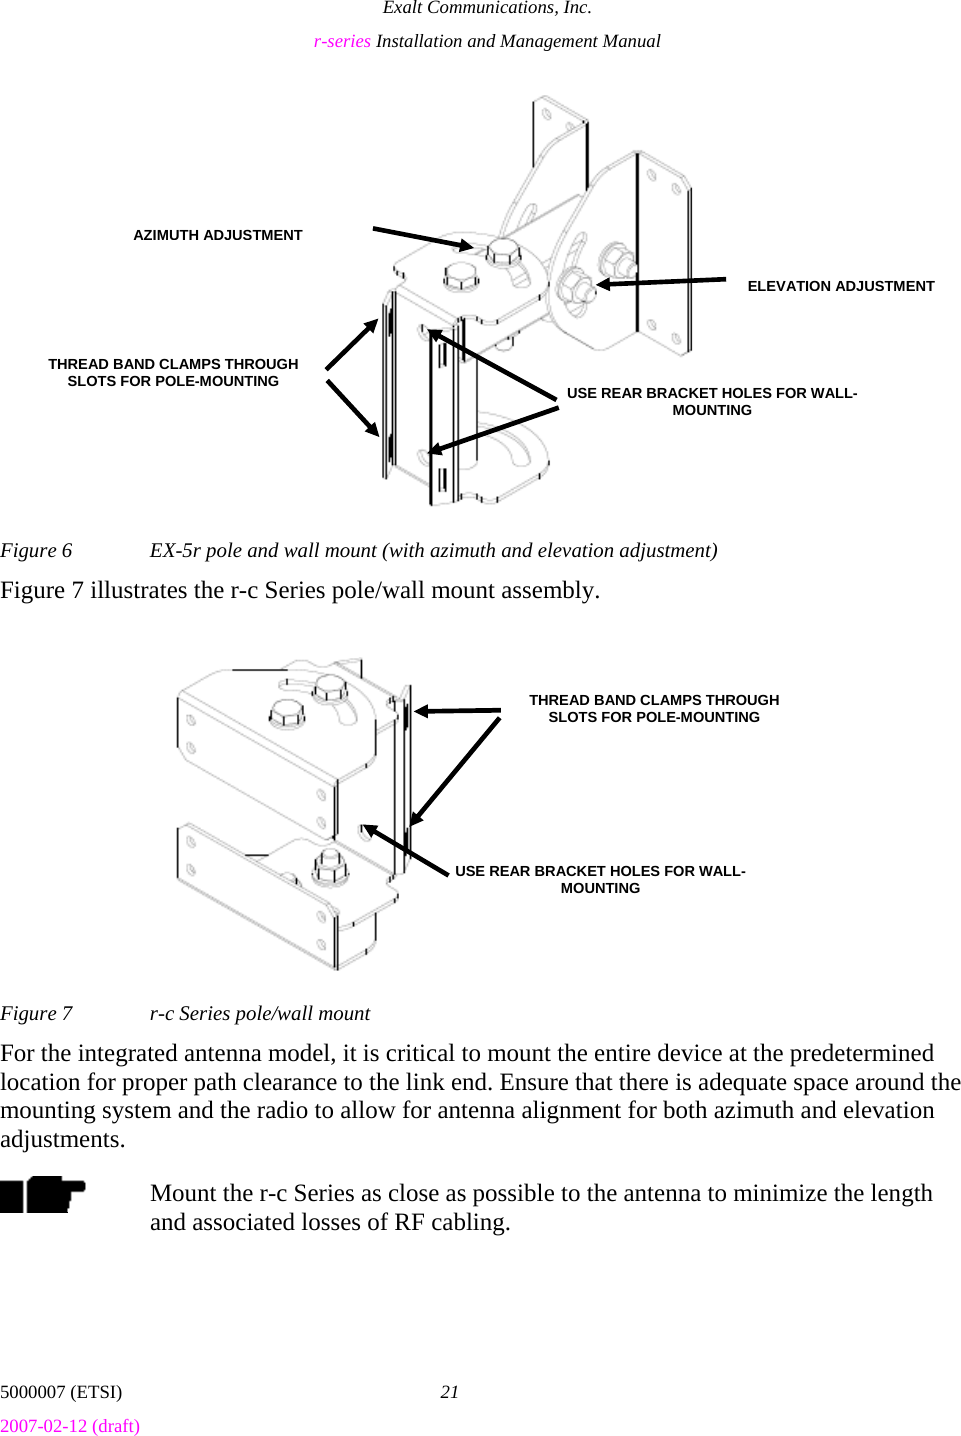 Exalt Communications, Inc. r-series Installation and Management Manual 5000007 (ETSI)  21 2007-02-12 (draft)  Figure 6  EX-5r pole and wall mount (with azimuth and elevation adjustment) Figure 7 illustrates the r-c Series pole/wall mount assembly. Figure 7  r-c Series pole/wall mount For the integrated antenna model, it is critical to mount the entire device at the predetermined location for proper path clearance to the link end. Ensure that there is adequate space around the mounting system and the radio to allow for antenna alignment for both azimuth and elevation adjustments. Mount the r-c Series as close as possible to the antenna to minimize the length and associated losses of RF cabling. THREAD BAND CLAMPS THROUGH SLOTS FOR POLE-MOUNTING  USE REAR BRACKET HOLES FOR WALL-MOUNTING AZIMUTH ADJUSTMENTELEVATION ADJUSTMENTUSE REAR BRACKET HOLES FOR WALL-MOUNTING THREAD BAND CLAMPS THROUGH SLOTS FOR POLE-MOUNTING 